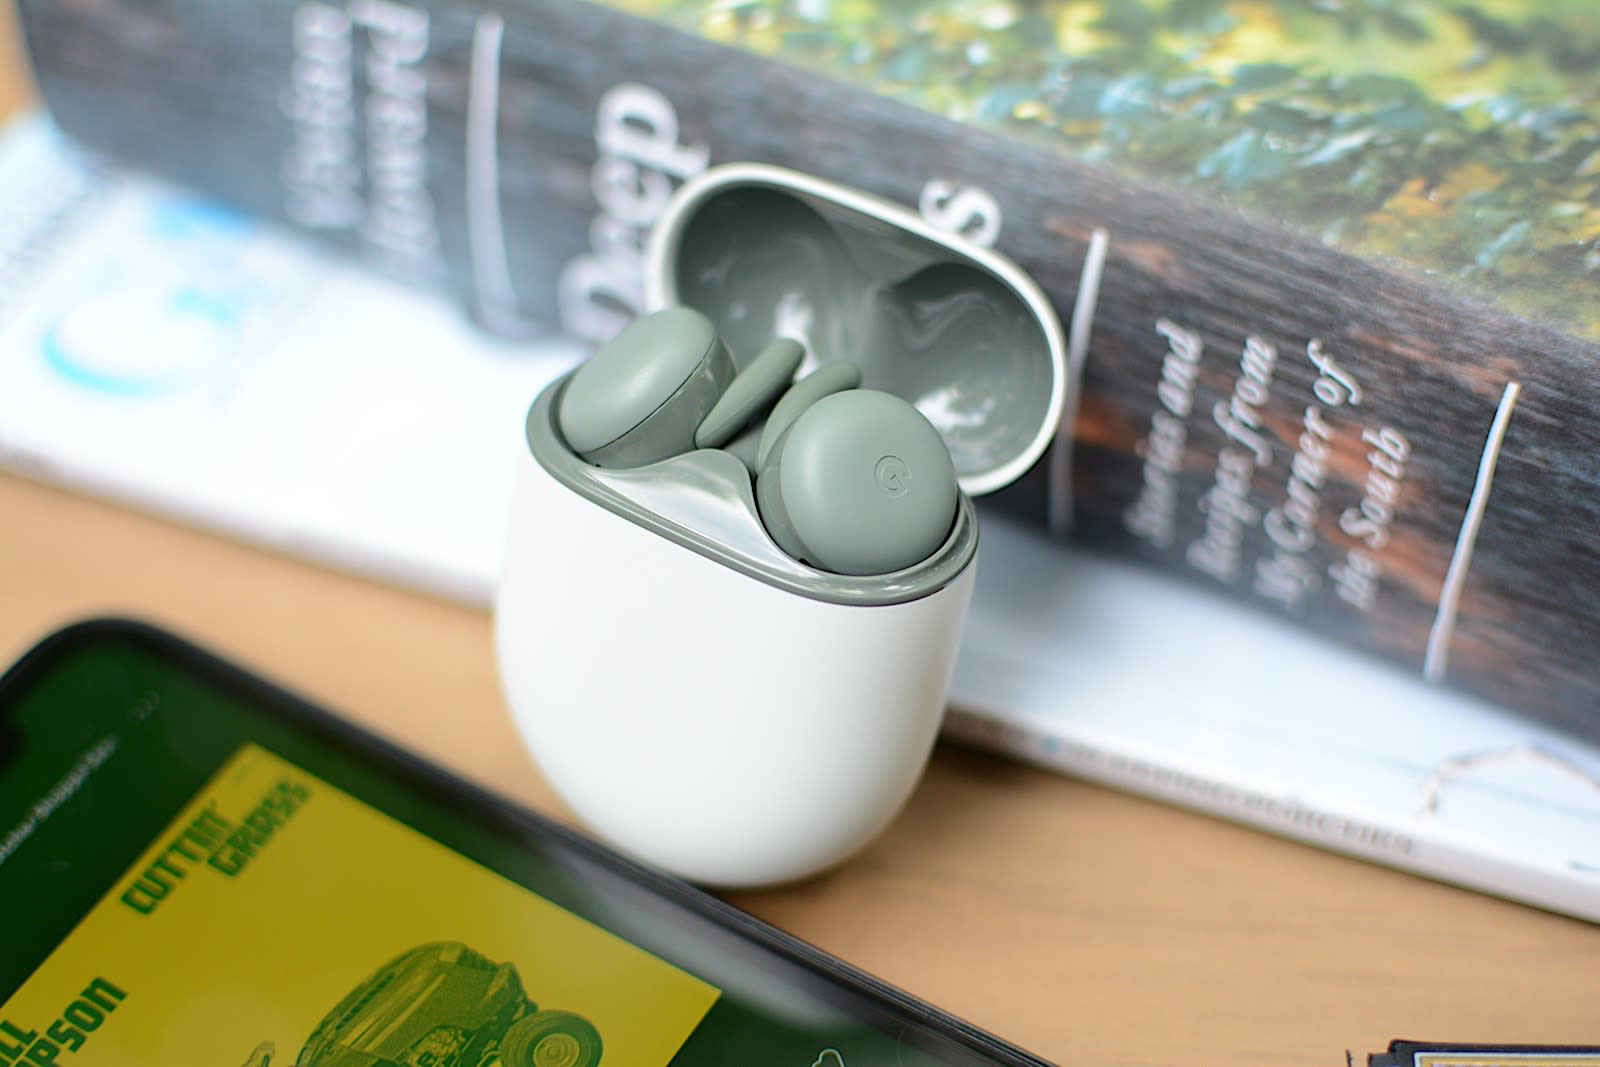 Google PIXEL BUDS A-SERIES CLEARLY WHITE